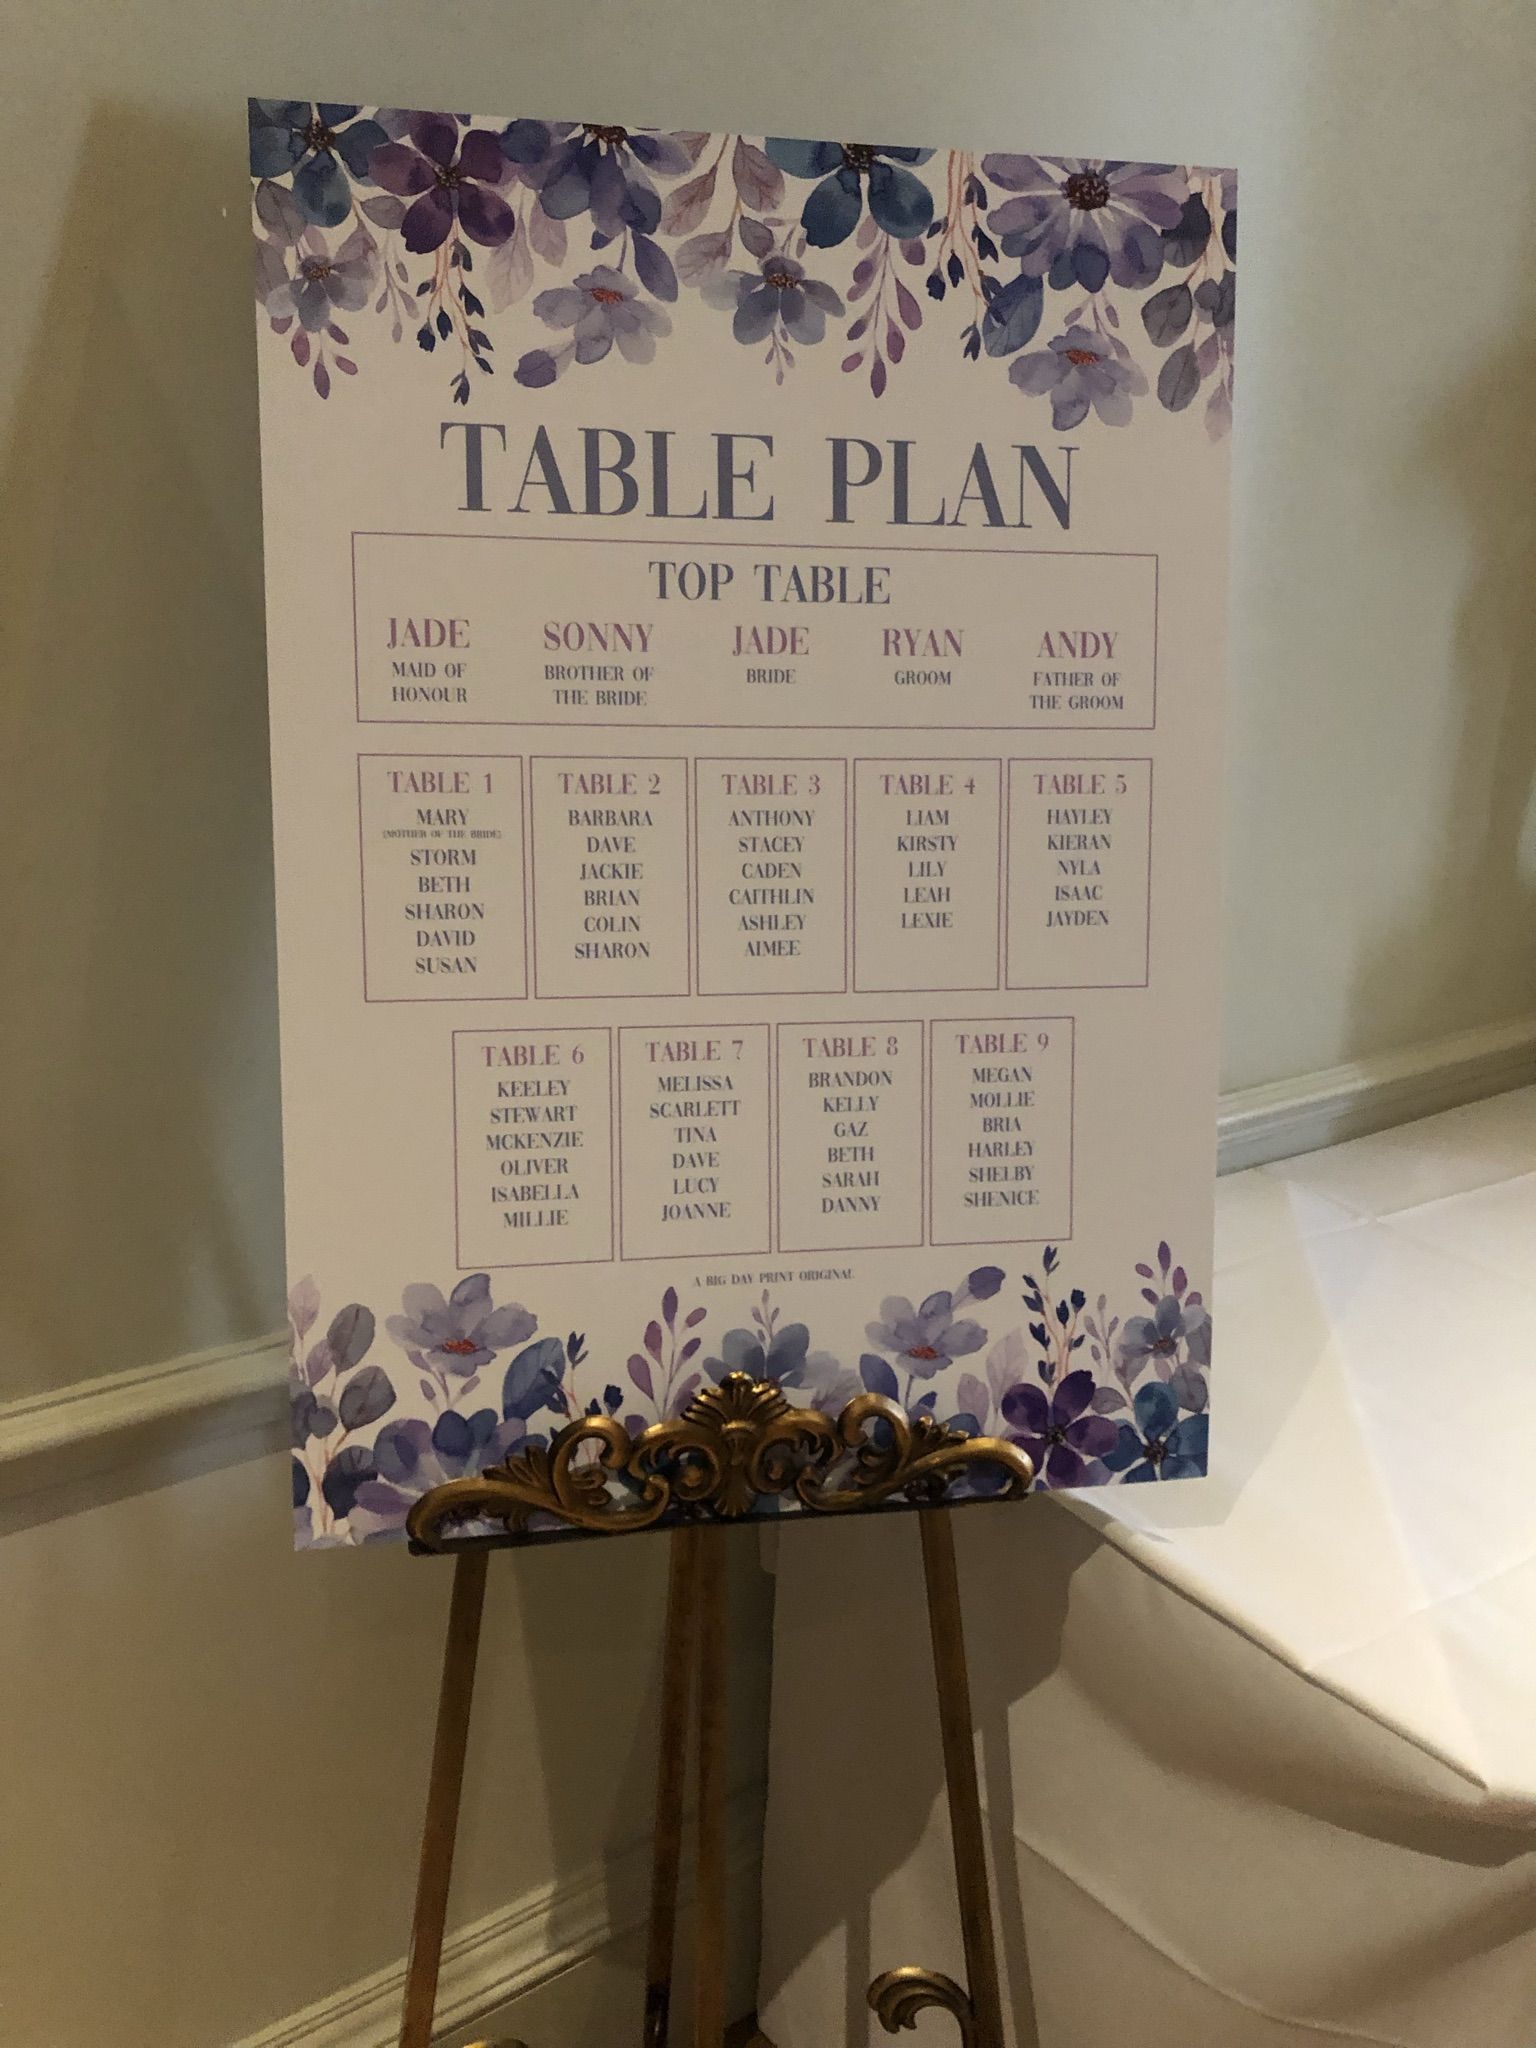 a table plan sitting on top of a easel.